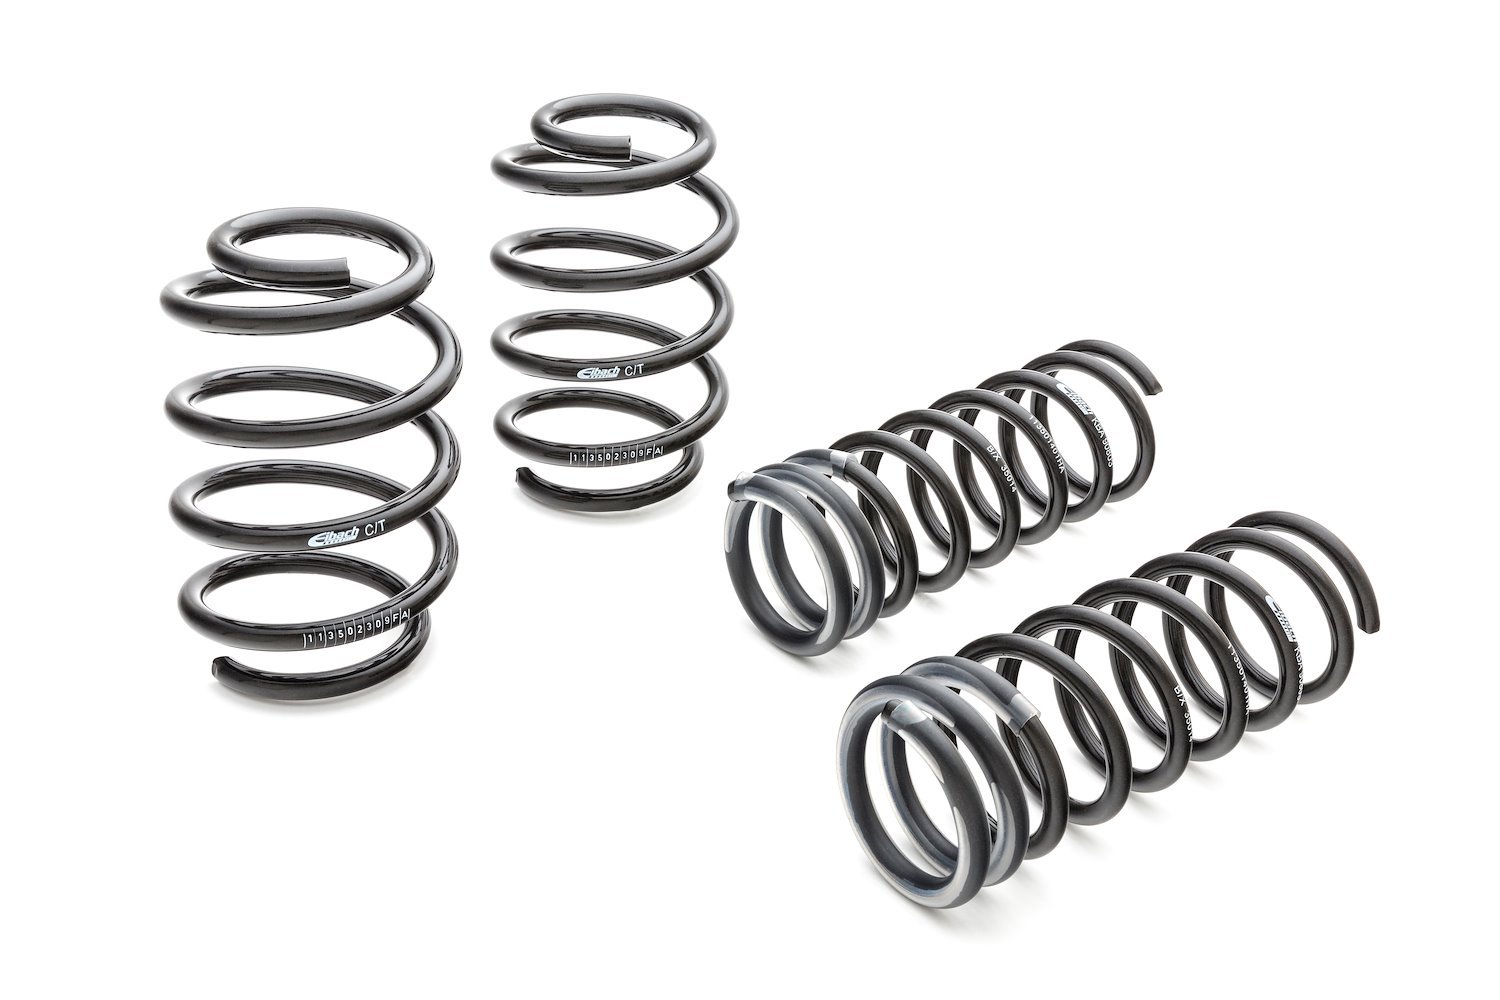 35147.140 Pro-Kit Lowering Springs 2015-2016 Mustang V6/EcoBoost - 1.100 in. Front/1 in. Rear Drop